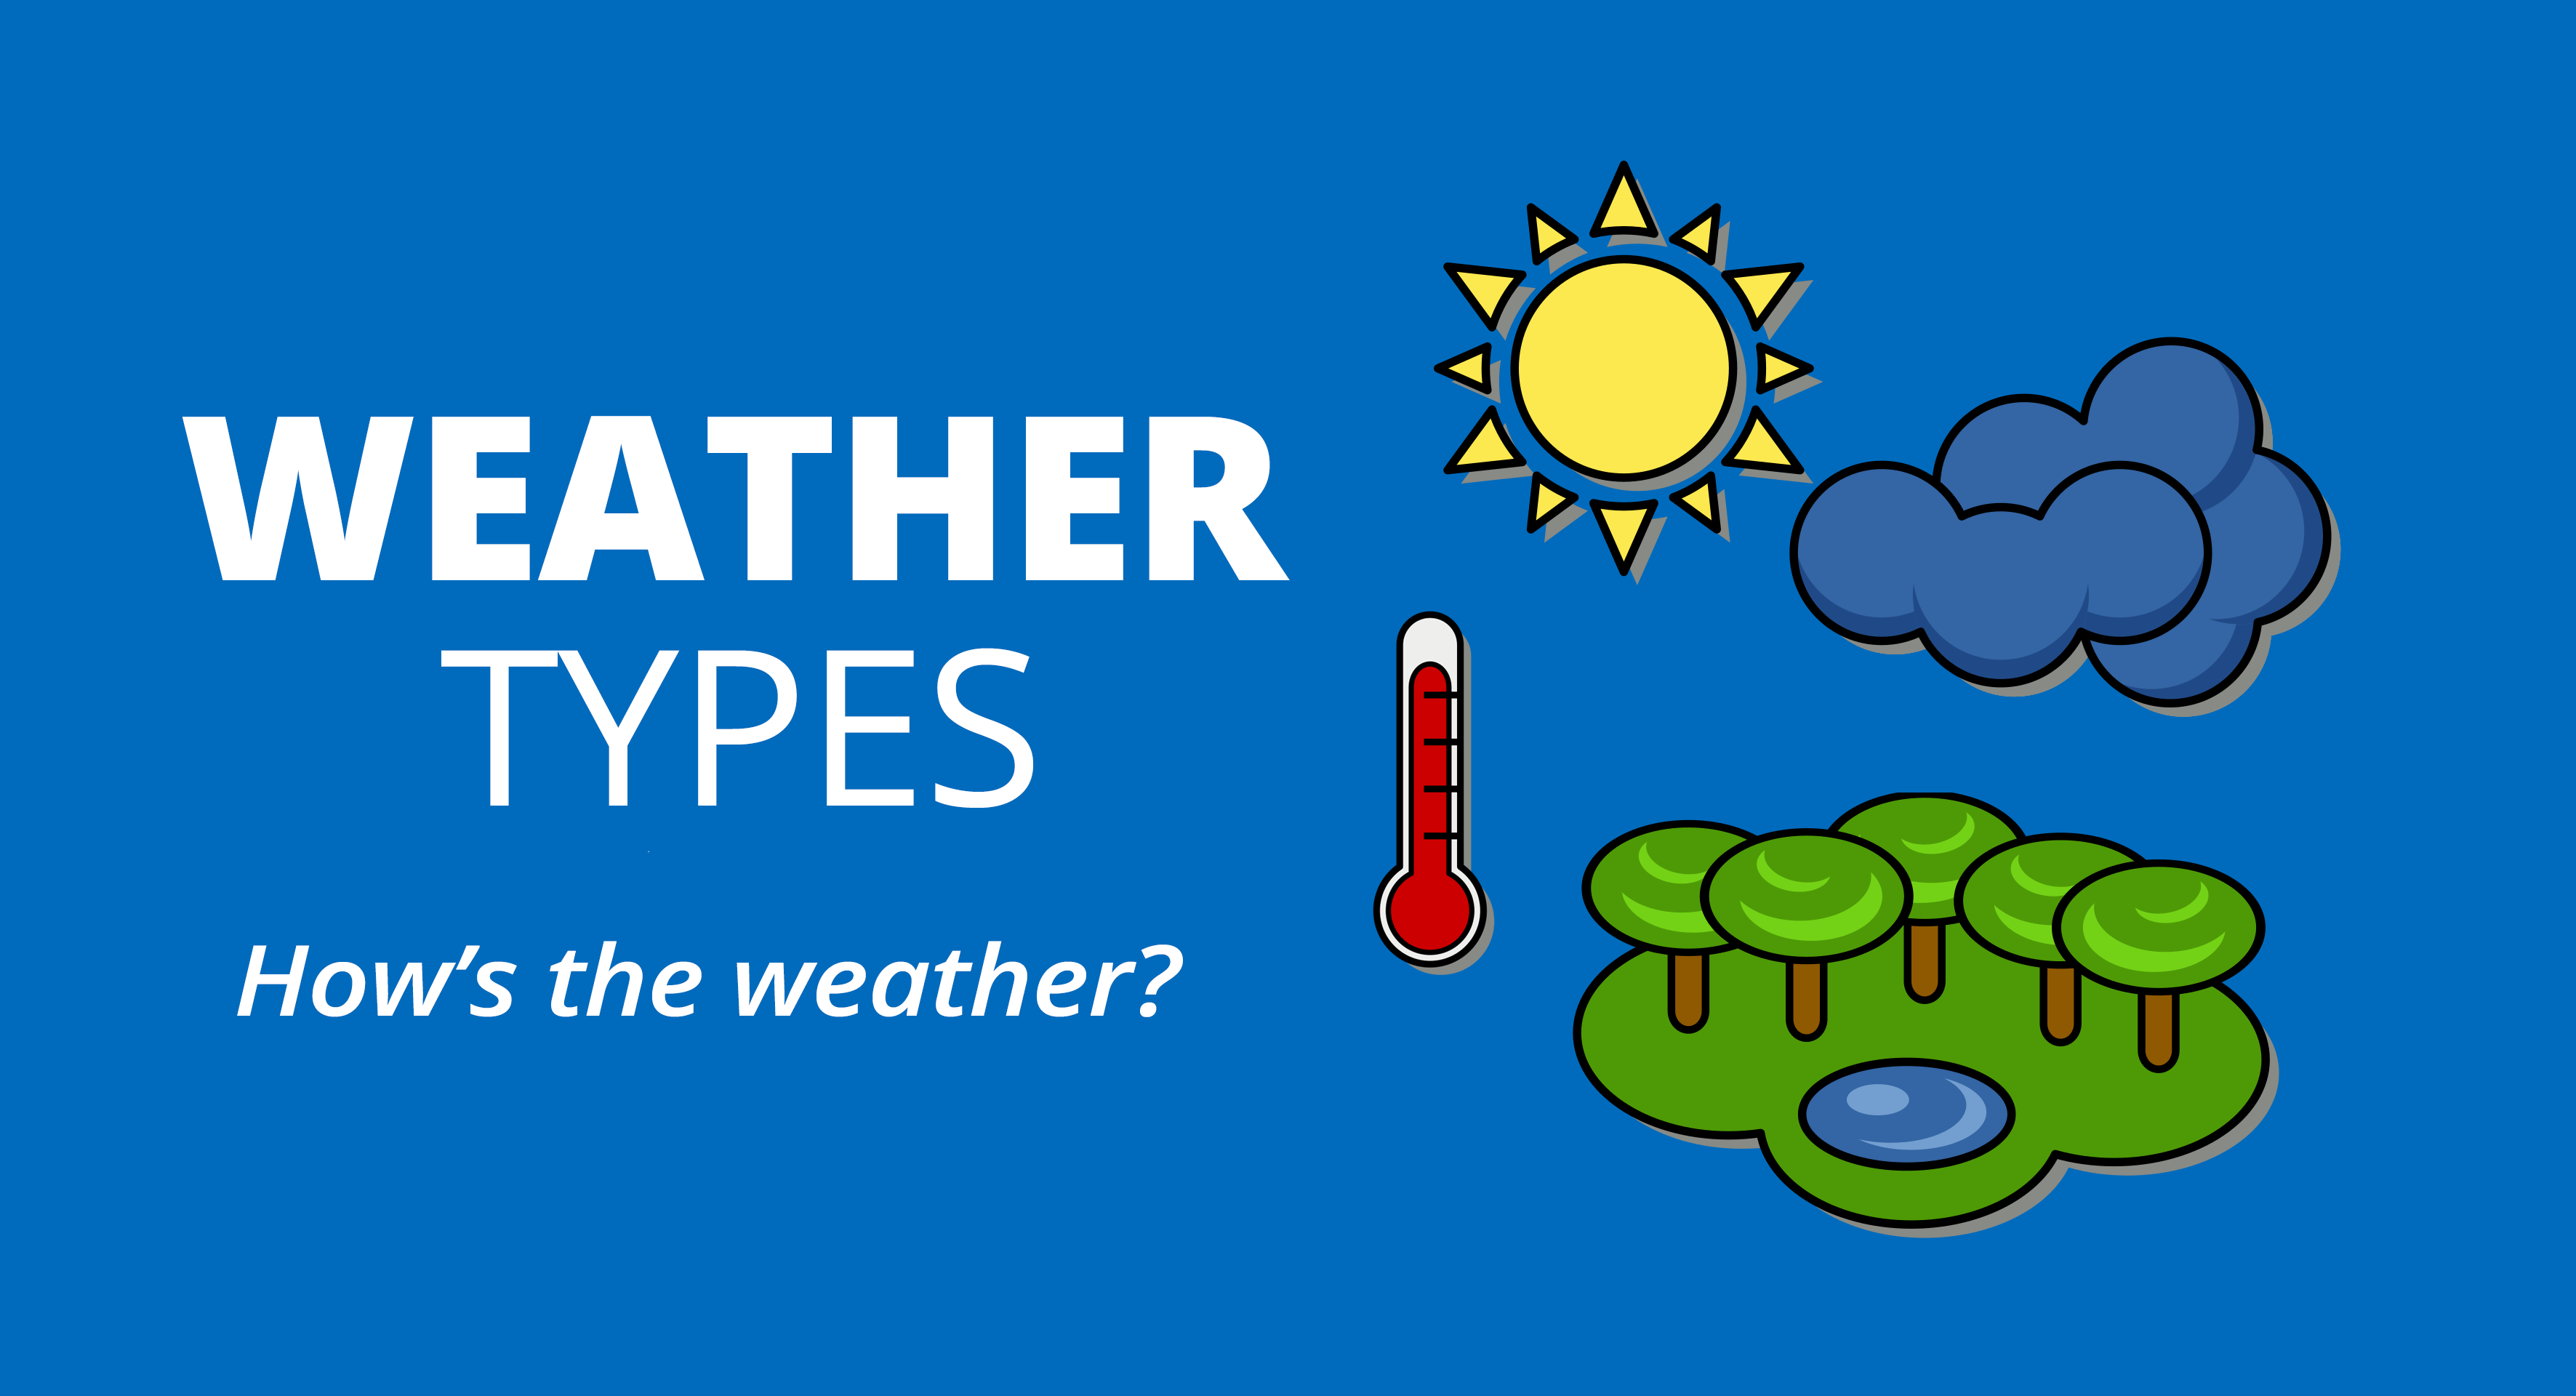 How the weather. Types of weather. Weather Quiz. Weather for Kids. Weather News for Kids.